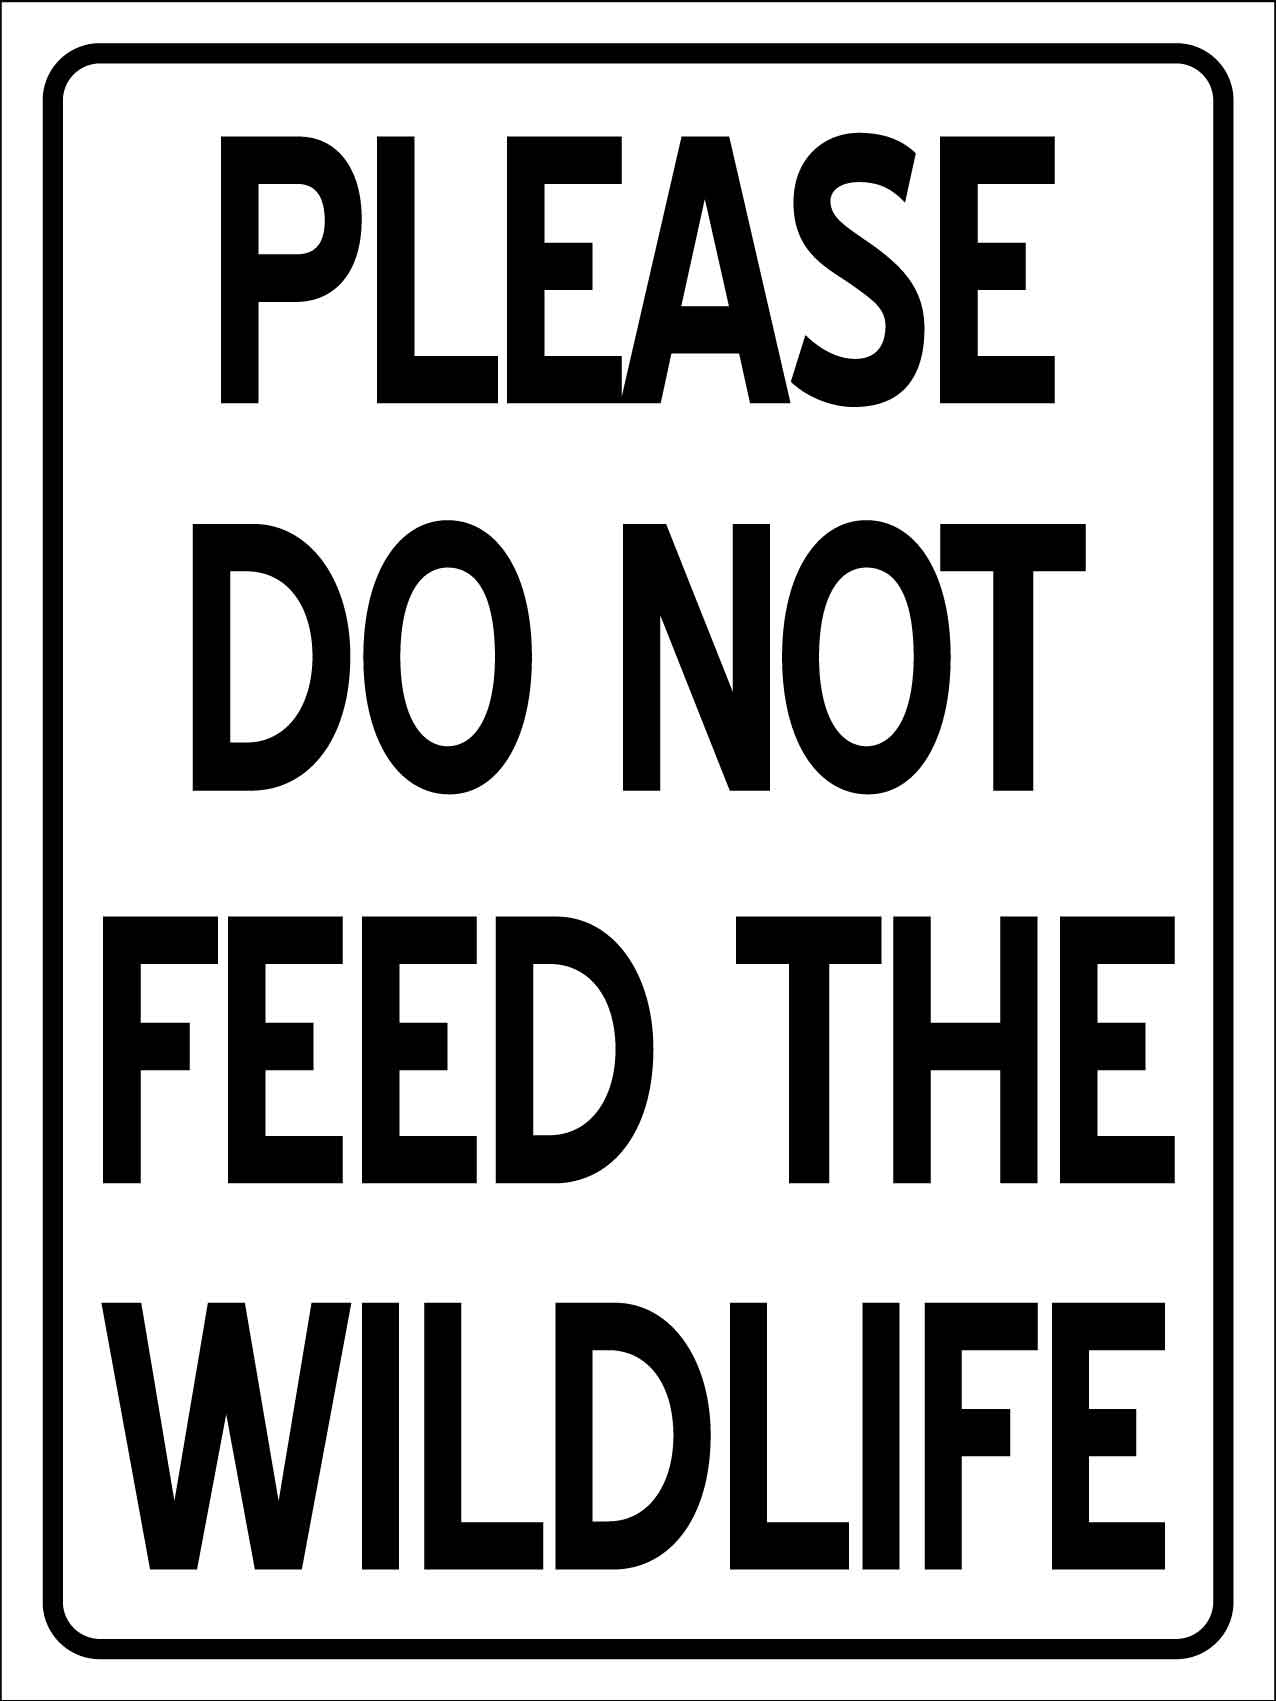 Please Do Not Feed the Wildlife Sign